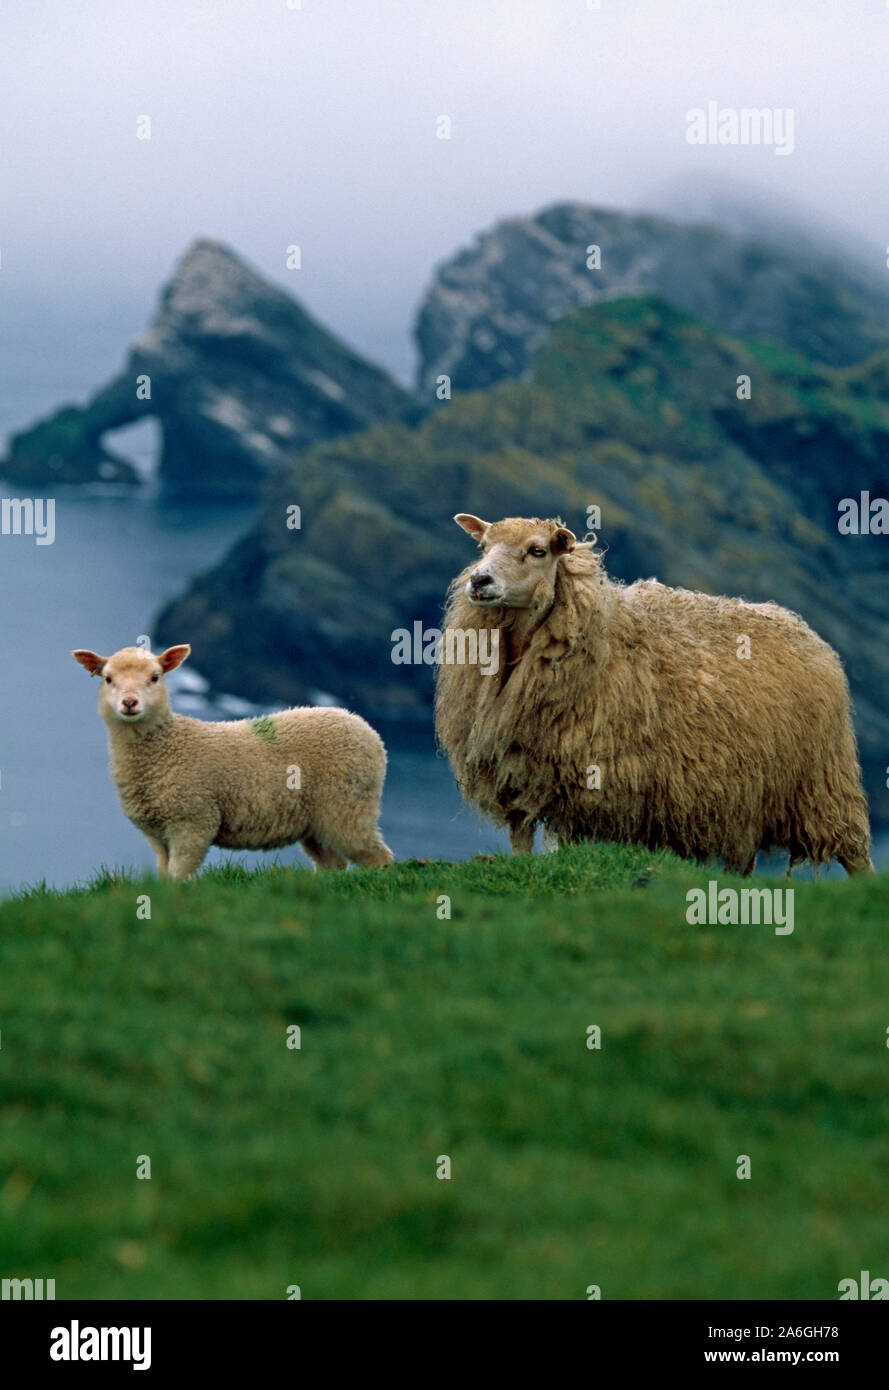 SHETLAND SHEEP. Ewe with lamb on cliff edge. Native breed.  Herma Ness, Unst, Shetland Isles, Scotland. Survivors adverse extreme weather conditions. Stock Photo